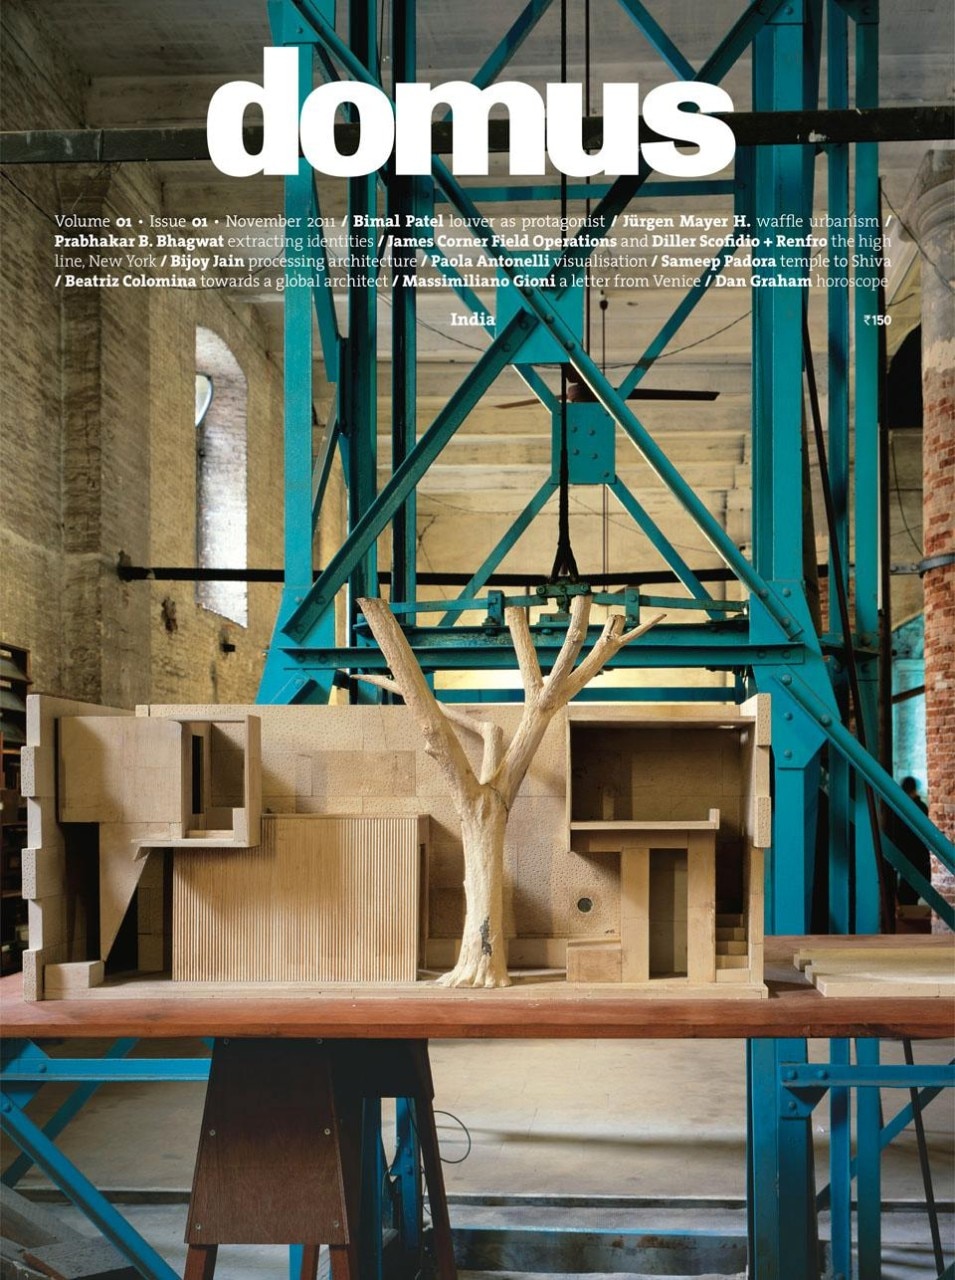 The cover of the debut issue of Domus India, November 2011.  Studio Mumbai's installation presented on the occasion of the 12th Venice Architecture Biennale in 2012. Cover photograph by Hélène Binet.